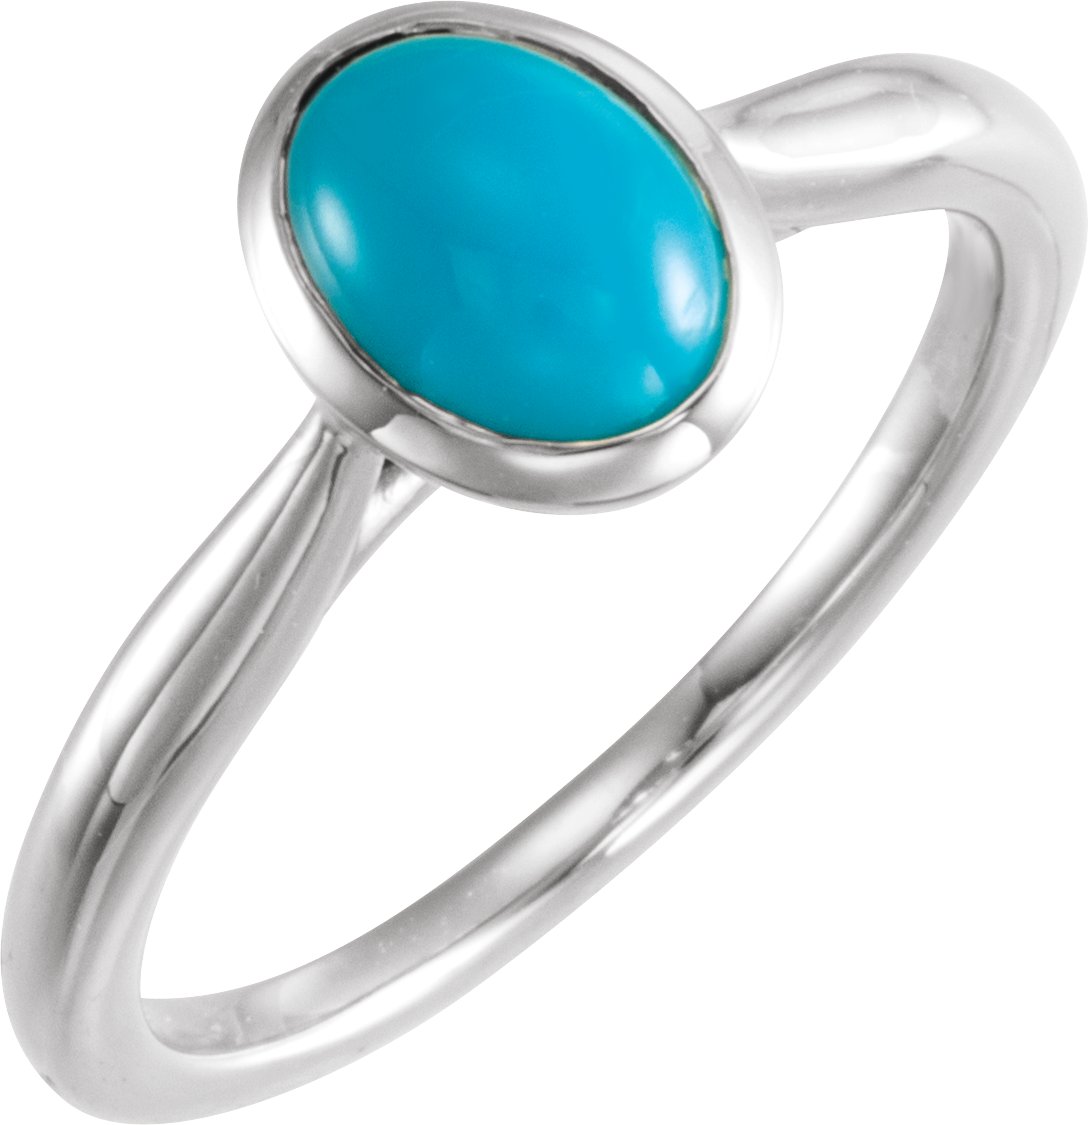 Sterling Silver 8x6 mm Natural Turquoise Cabochon Ring